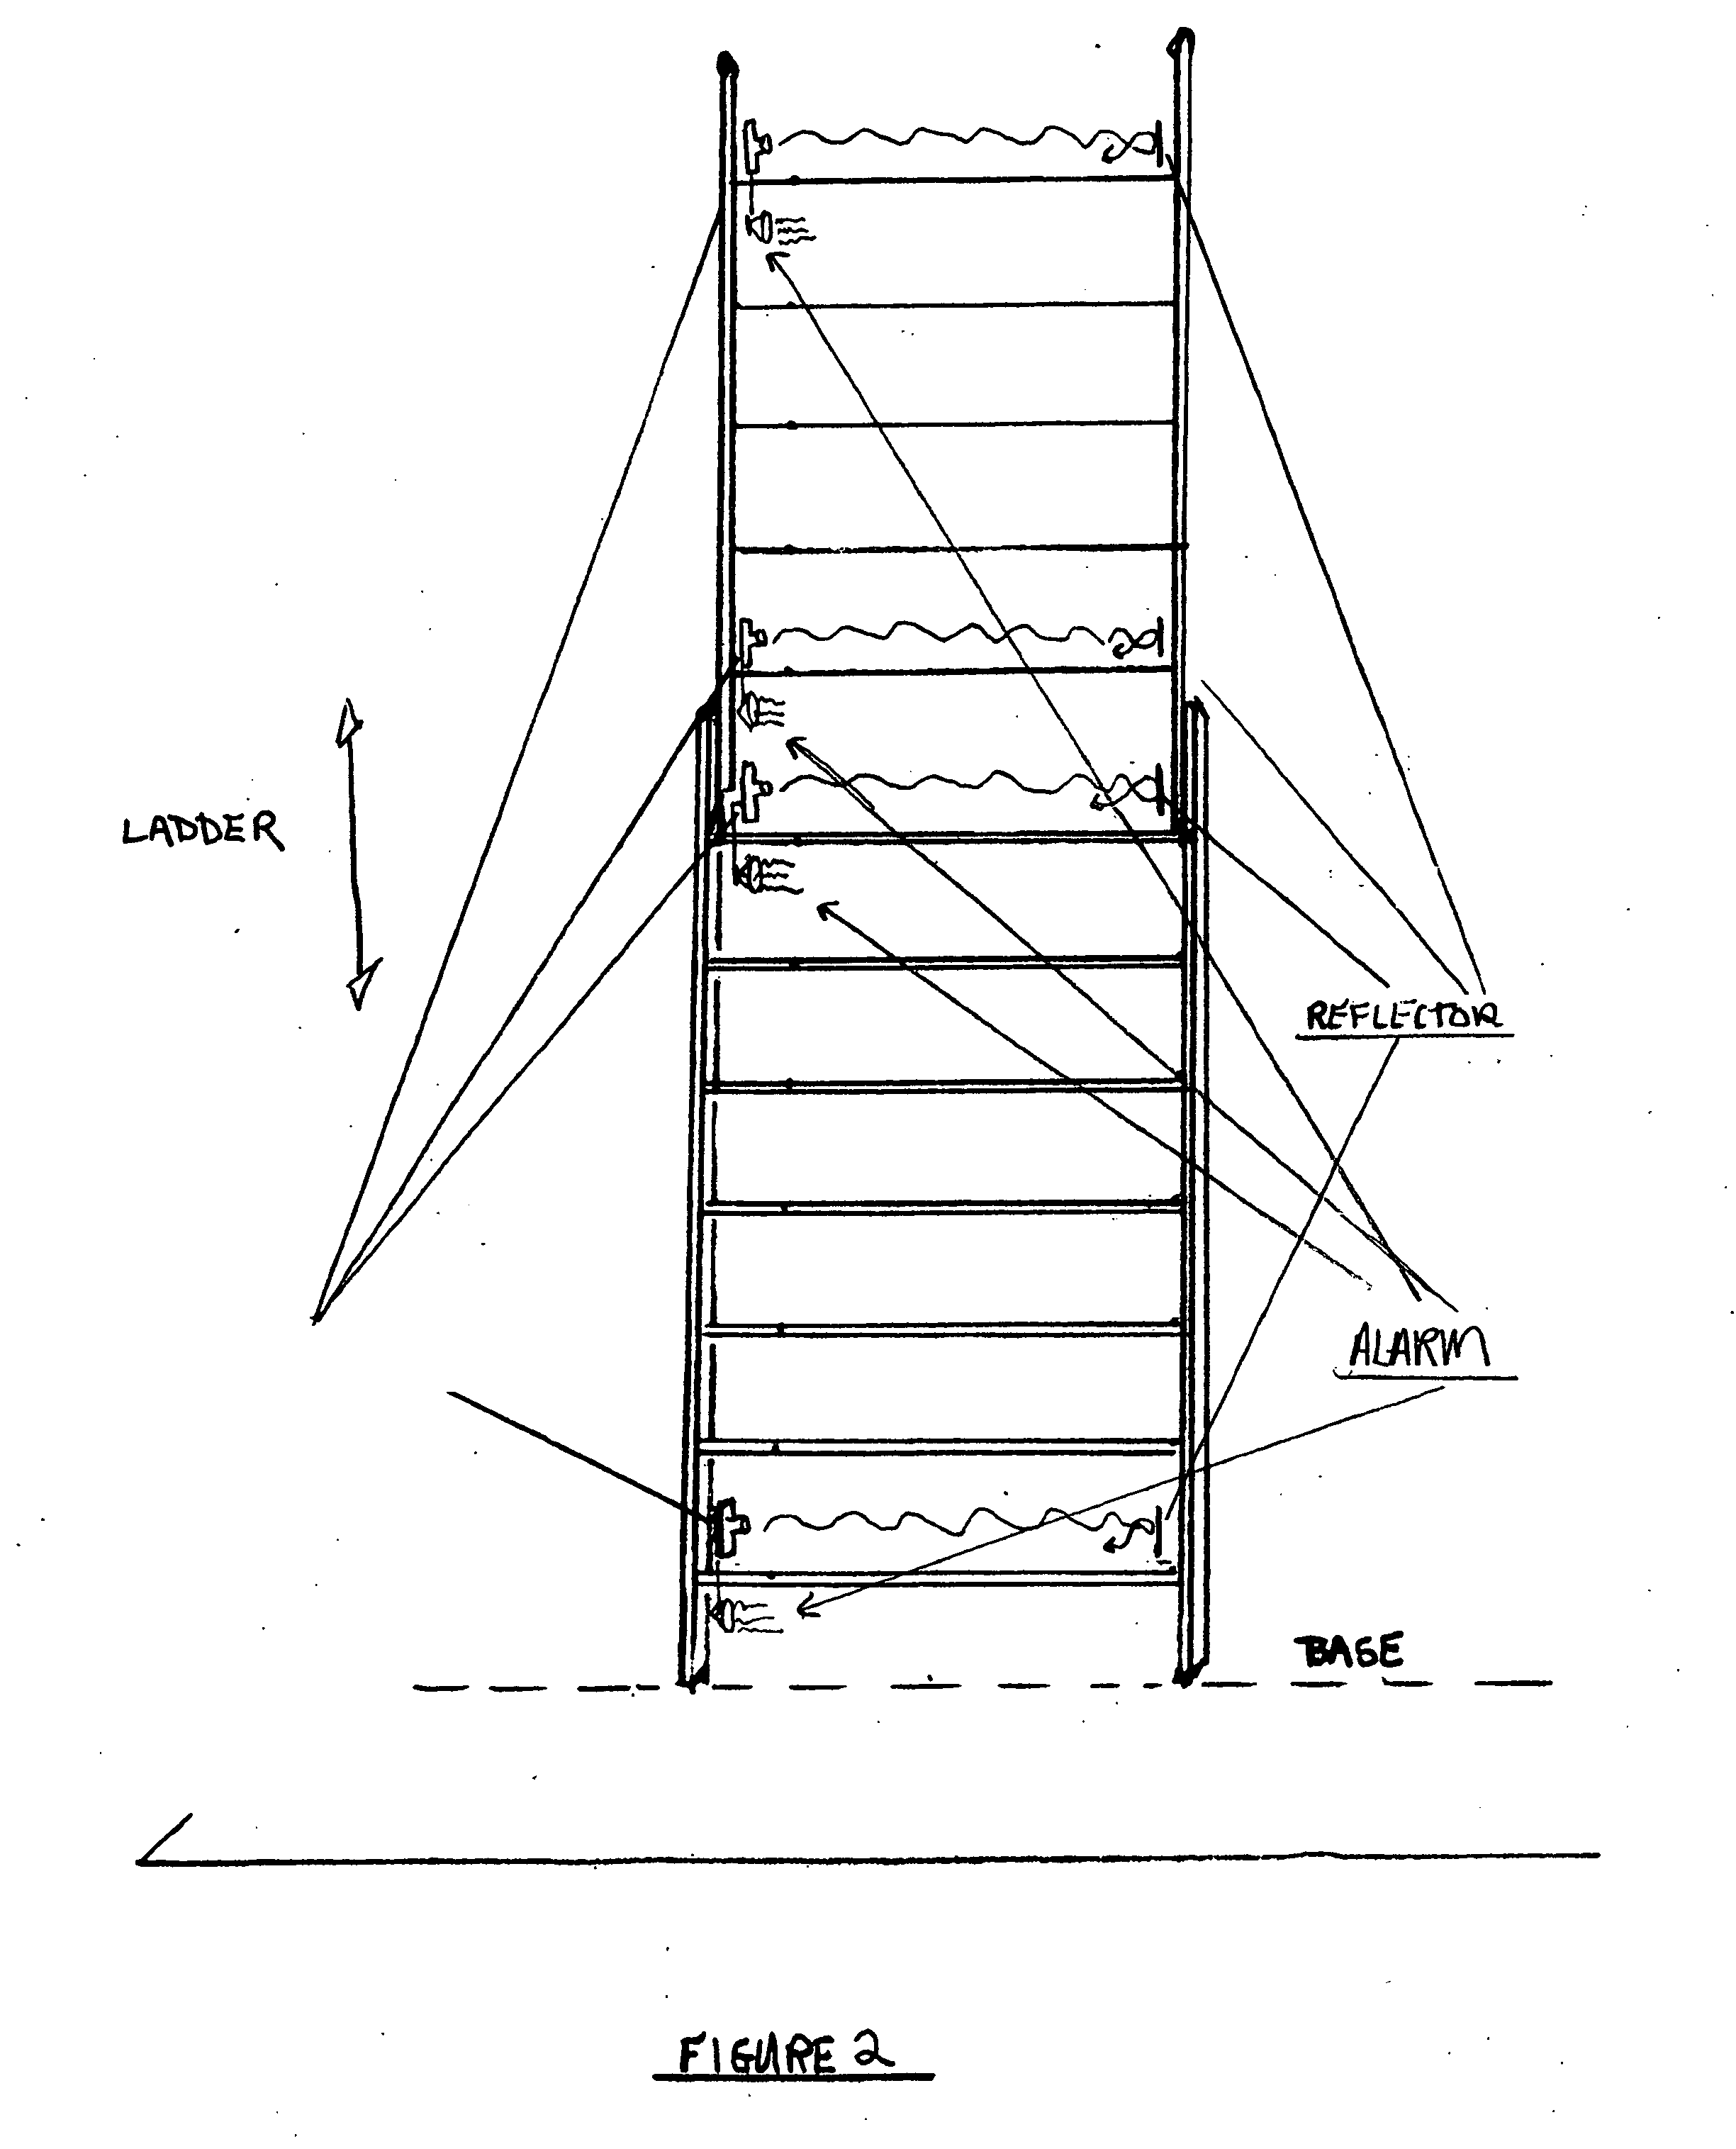 System and method for providing a warning to ladder users of potentially hazardous steps